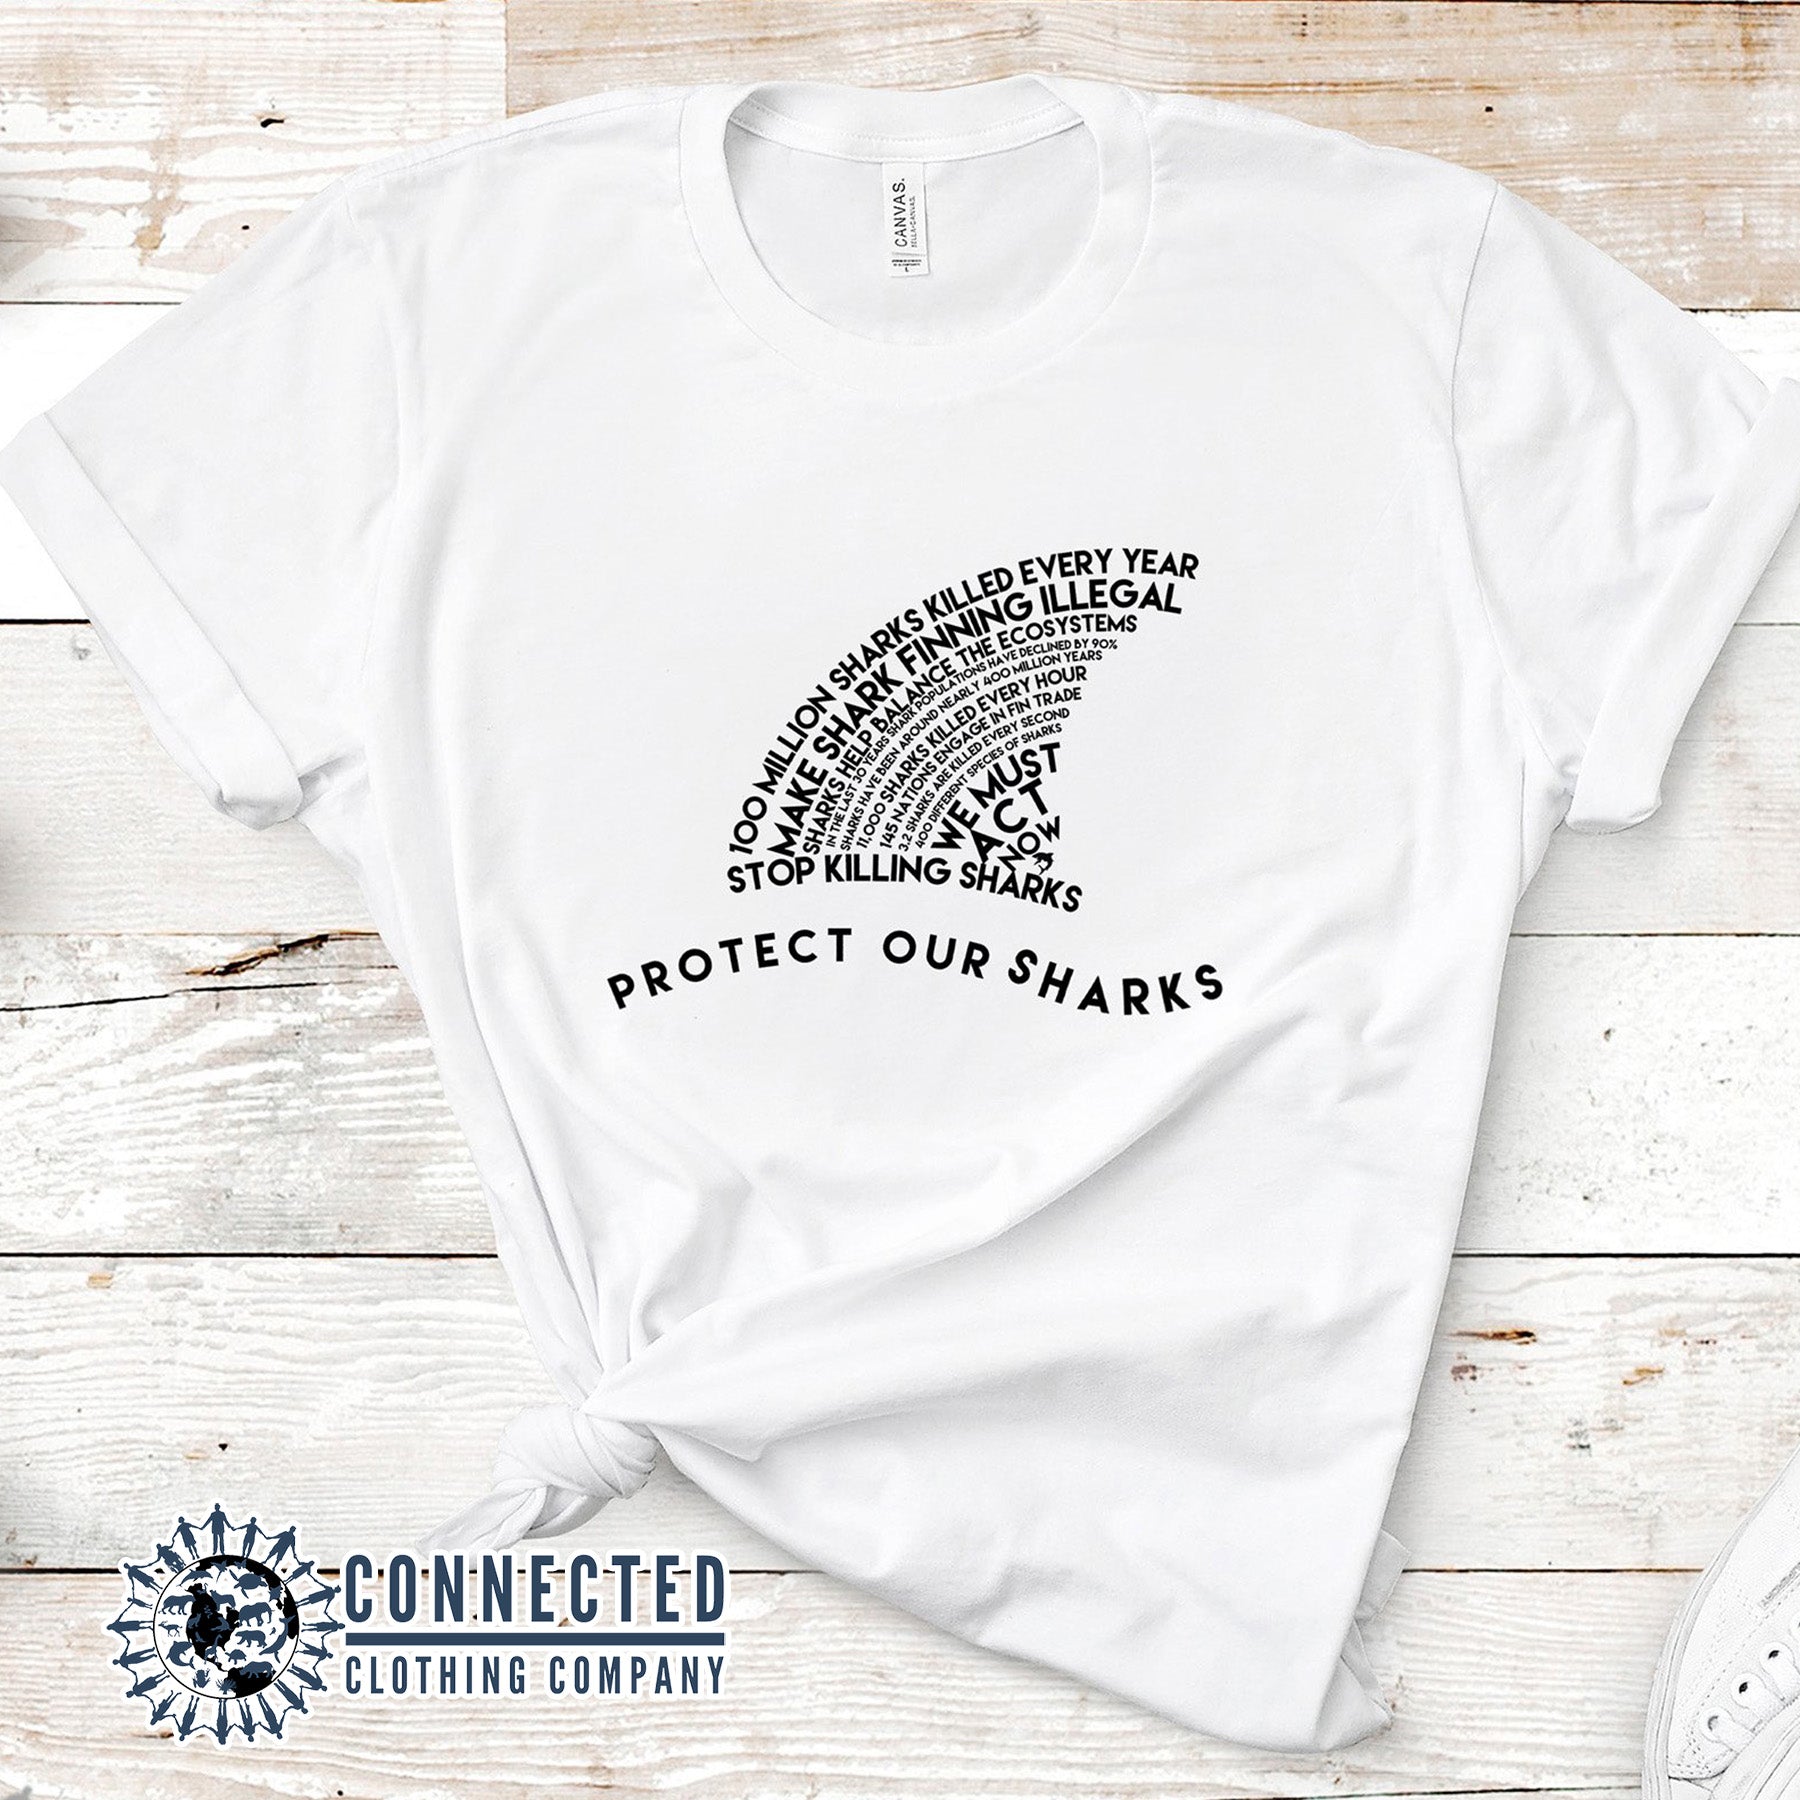 White Protect Our Sharks Short-Sleeve Tee - getpinkfit - Ethically and Sustainably Made - 10% of profits donated to shark conservation and ocean conservation